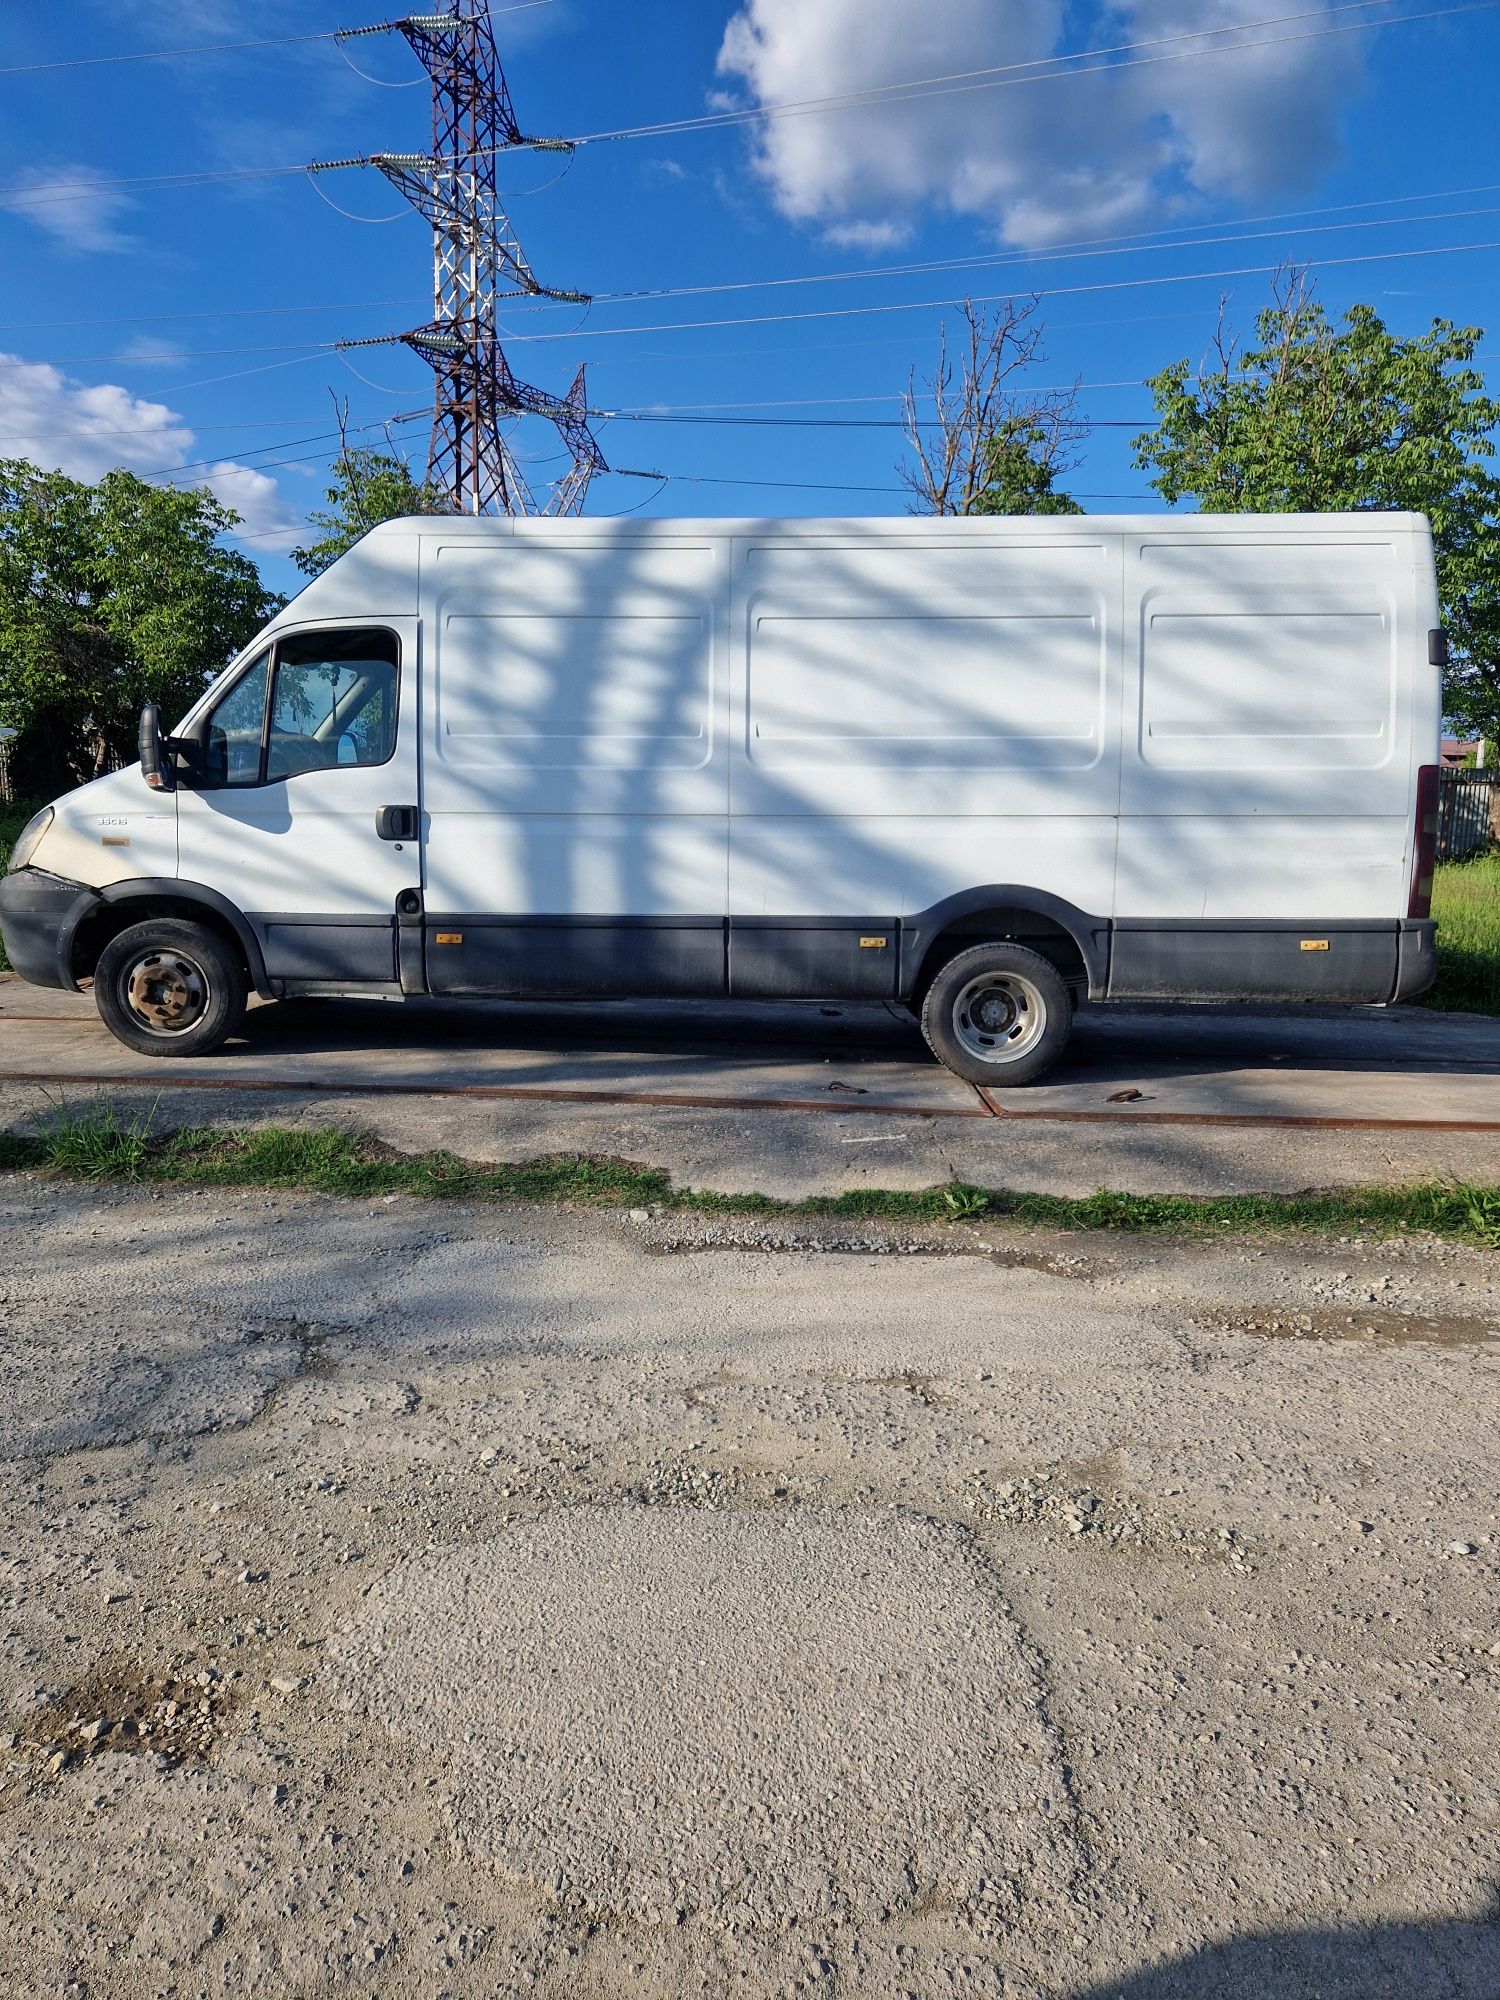 Iveco Daily 35c15